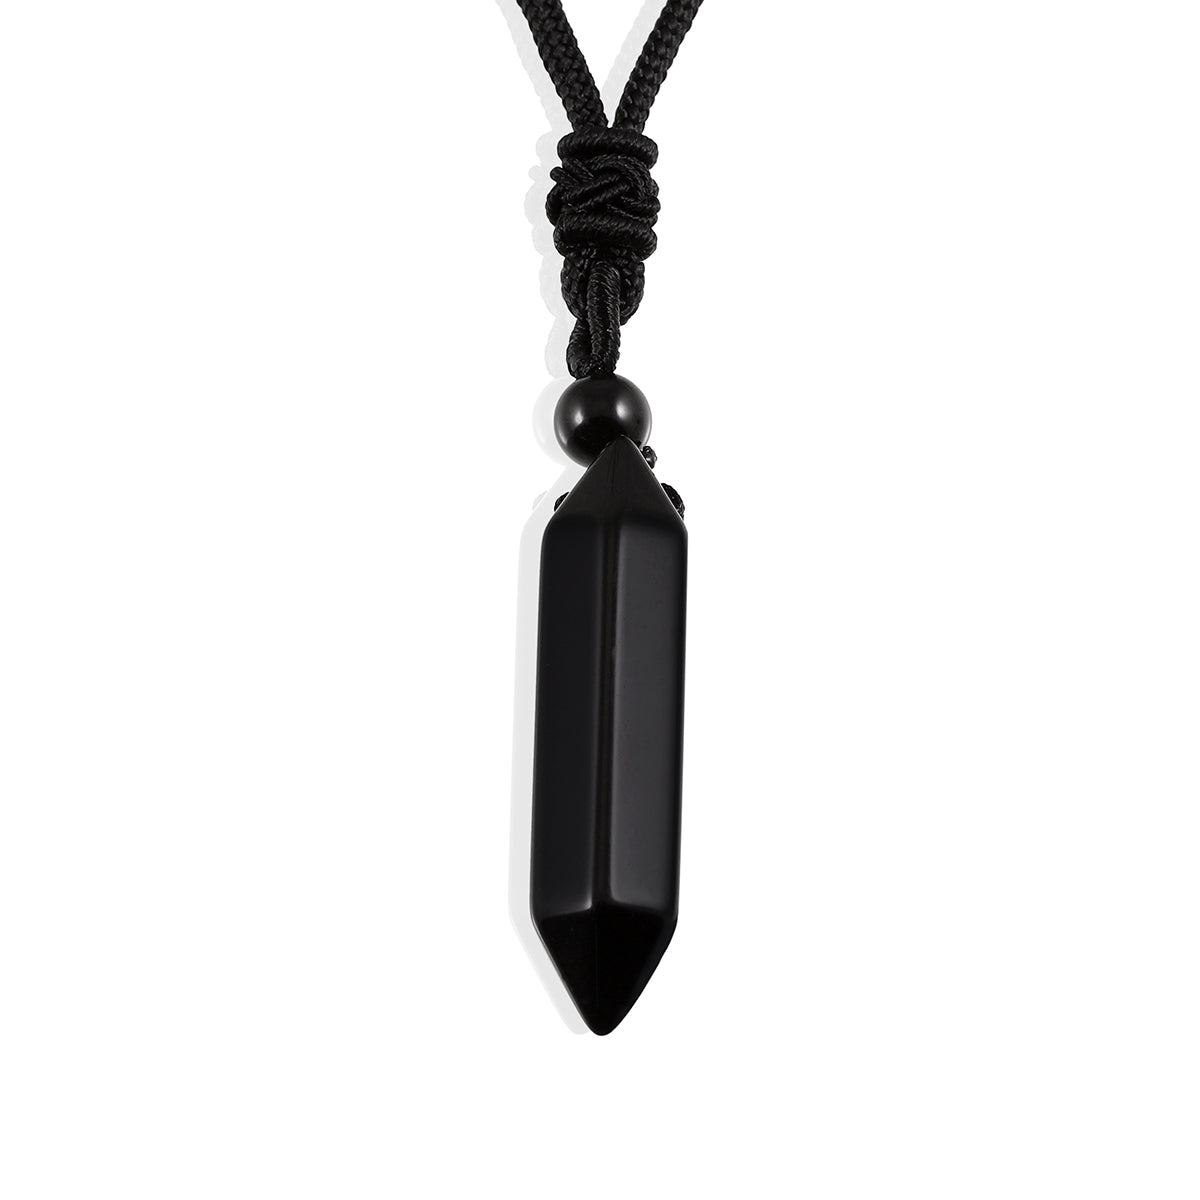 Black Onyx Hexagonal Pointed Rope Pendant Necklace